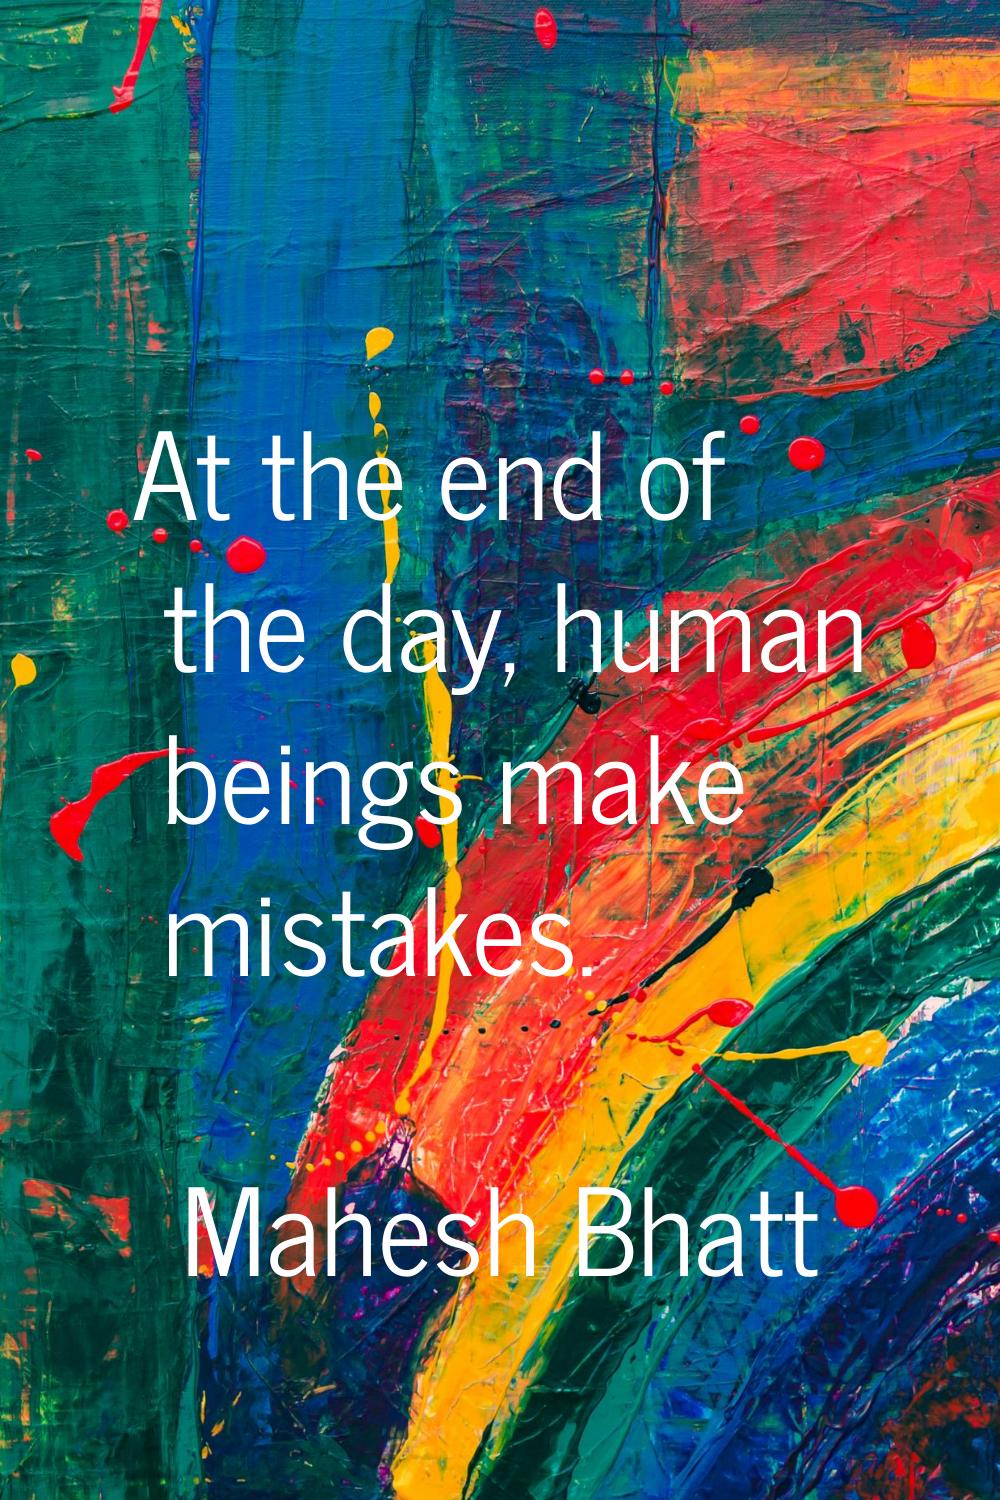 At the end of the day, human beings make mistakes.